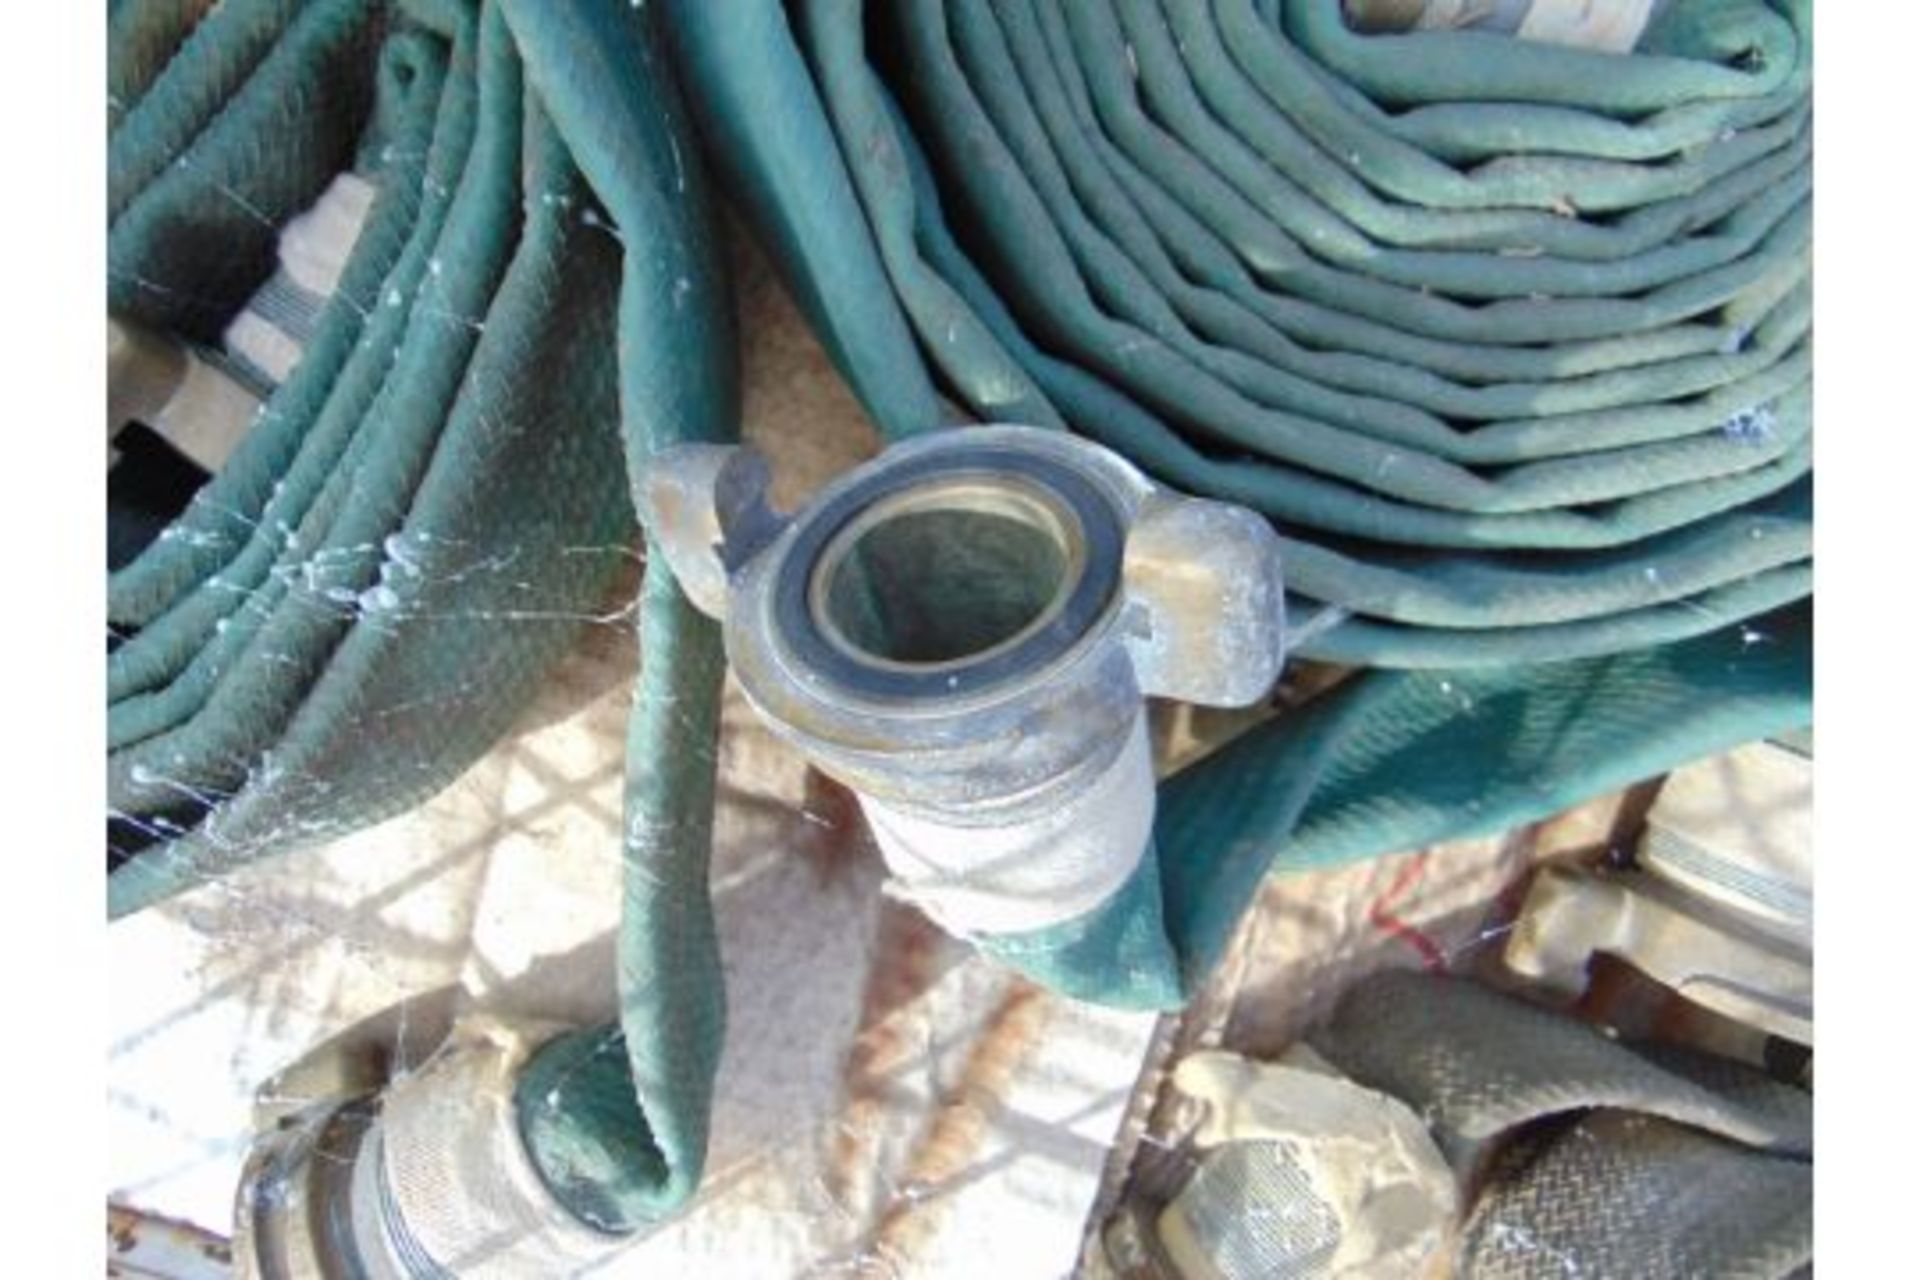 1 x Stillage of 11x Lengths of Lay Flat Hose - Image 3 of 3